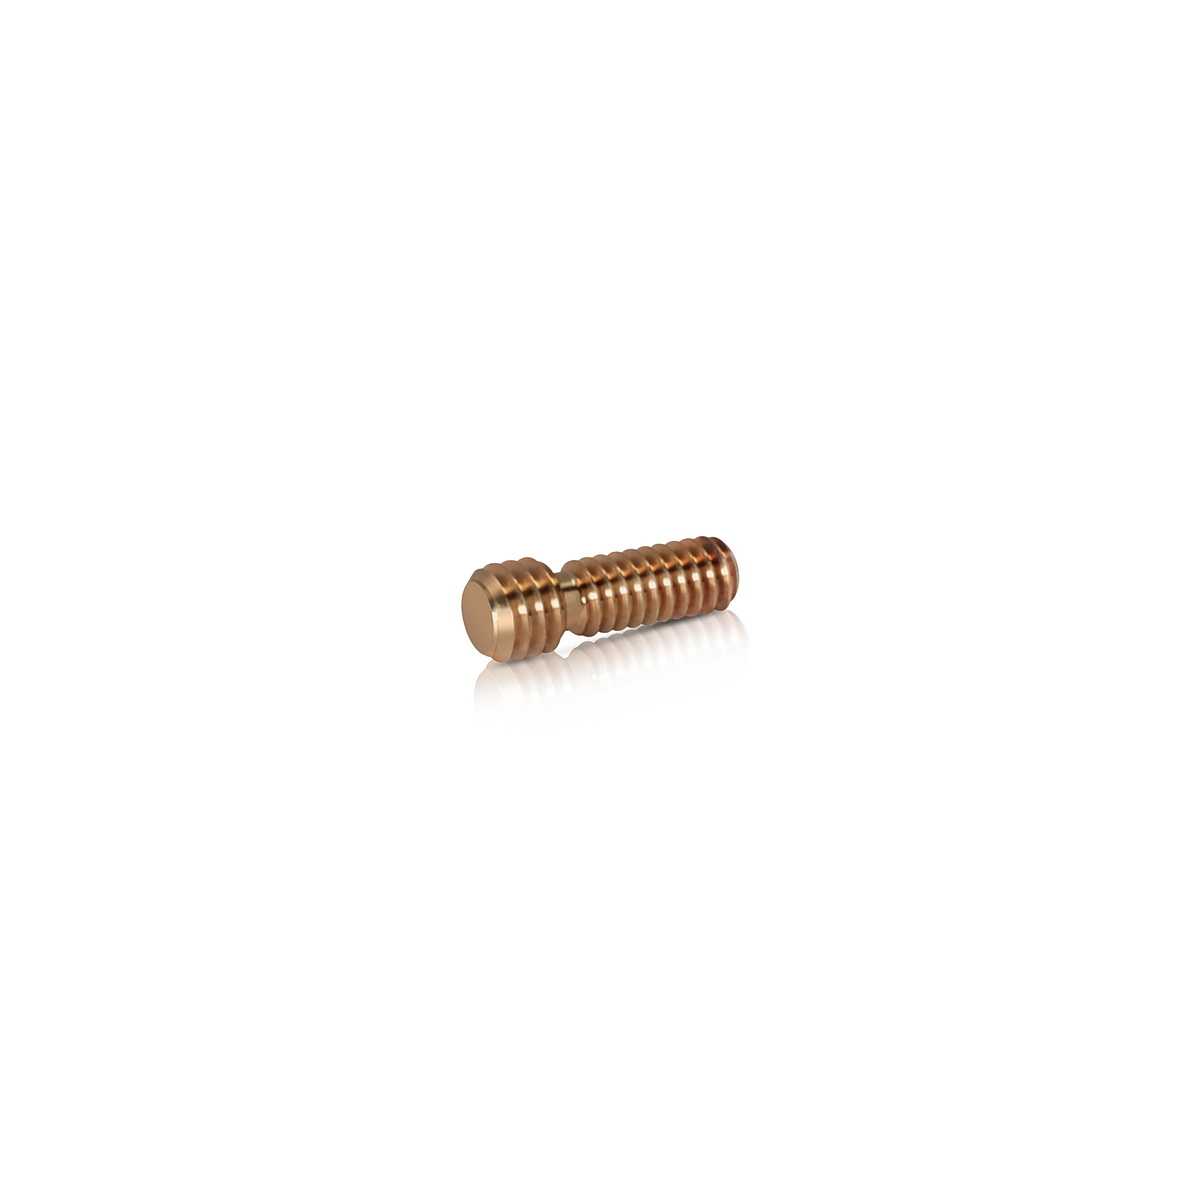 5/16-18 to 1/4-20 Conversion Set Screw, Total Length: 7/8''